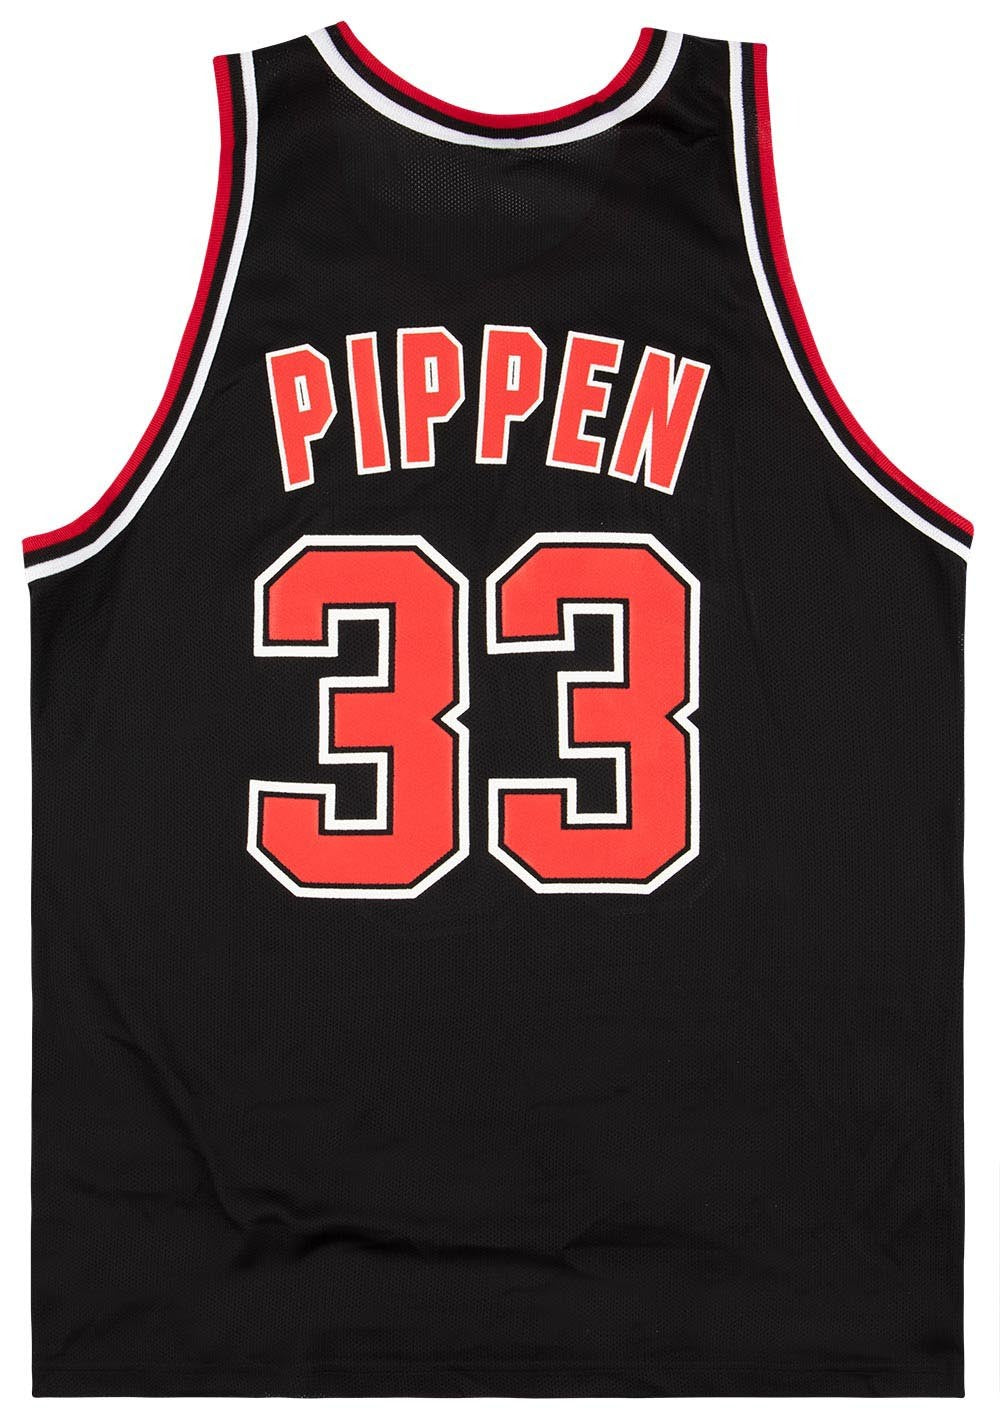 Chicago Bulls Basketball Champion Authentic bilateral Jersey #33 Pippen  size 44